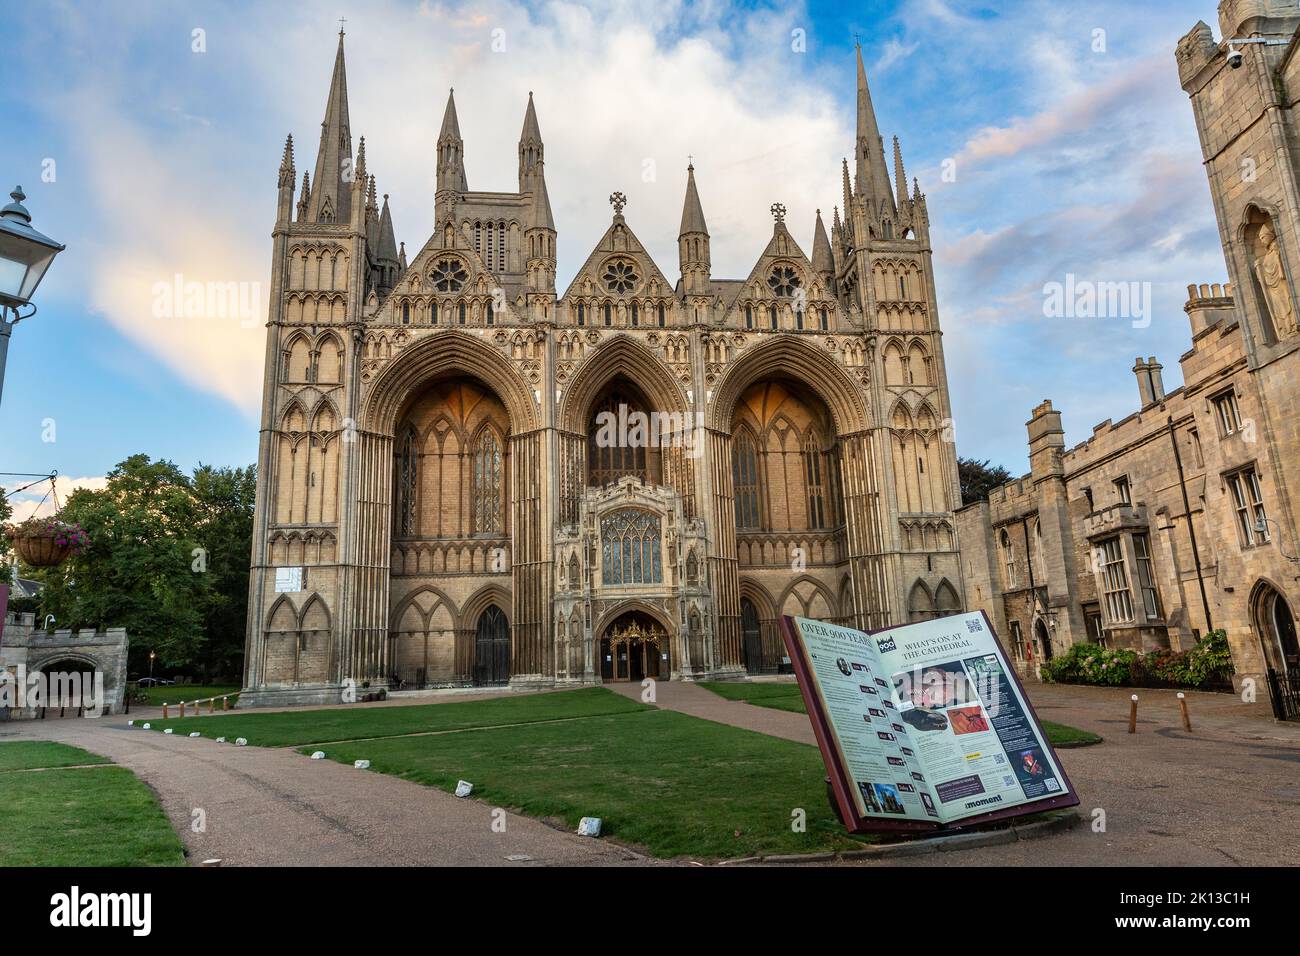 PETERBOROUGH CATHEDRAL, UK - SEPTEMBER 9, 2022.  Landscape architecture of the front facade and door of Peterborough Cathedral and grounds at sunset Stock Photo